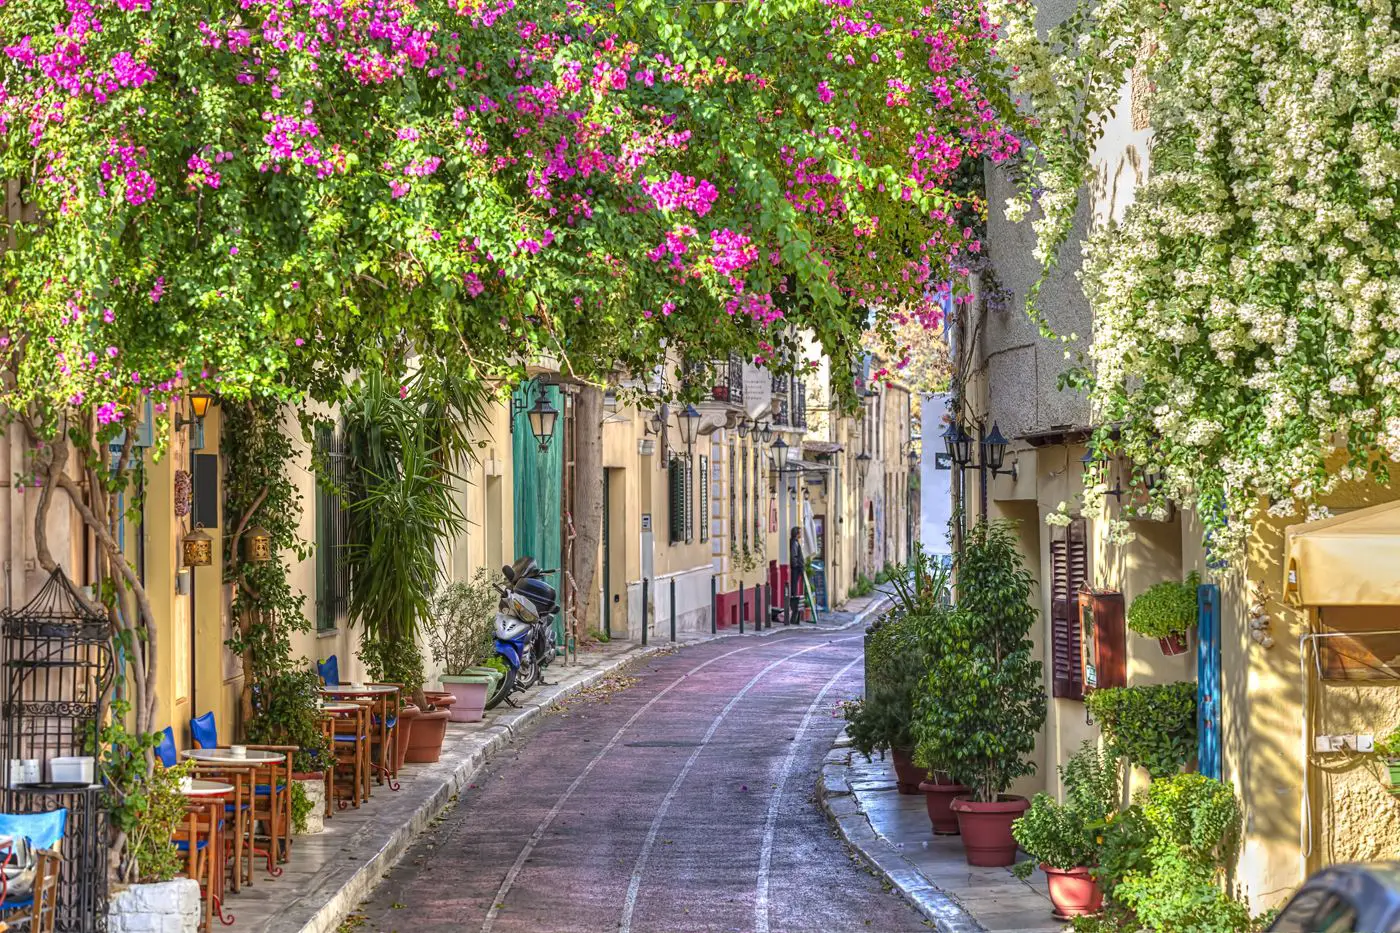 The streets of Plaka Athens